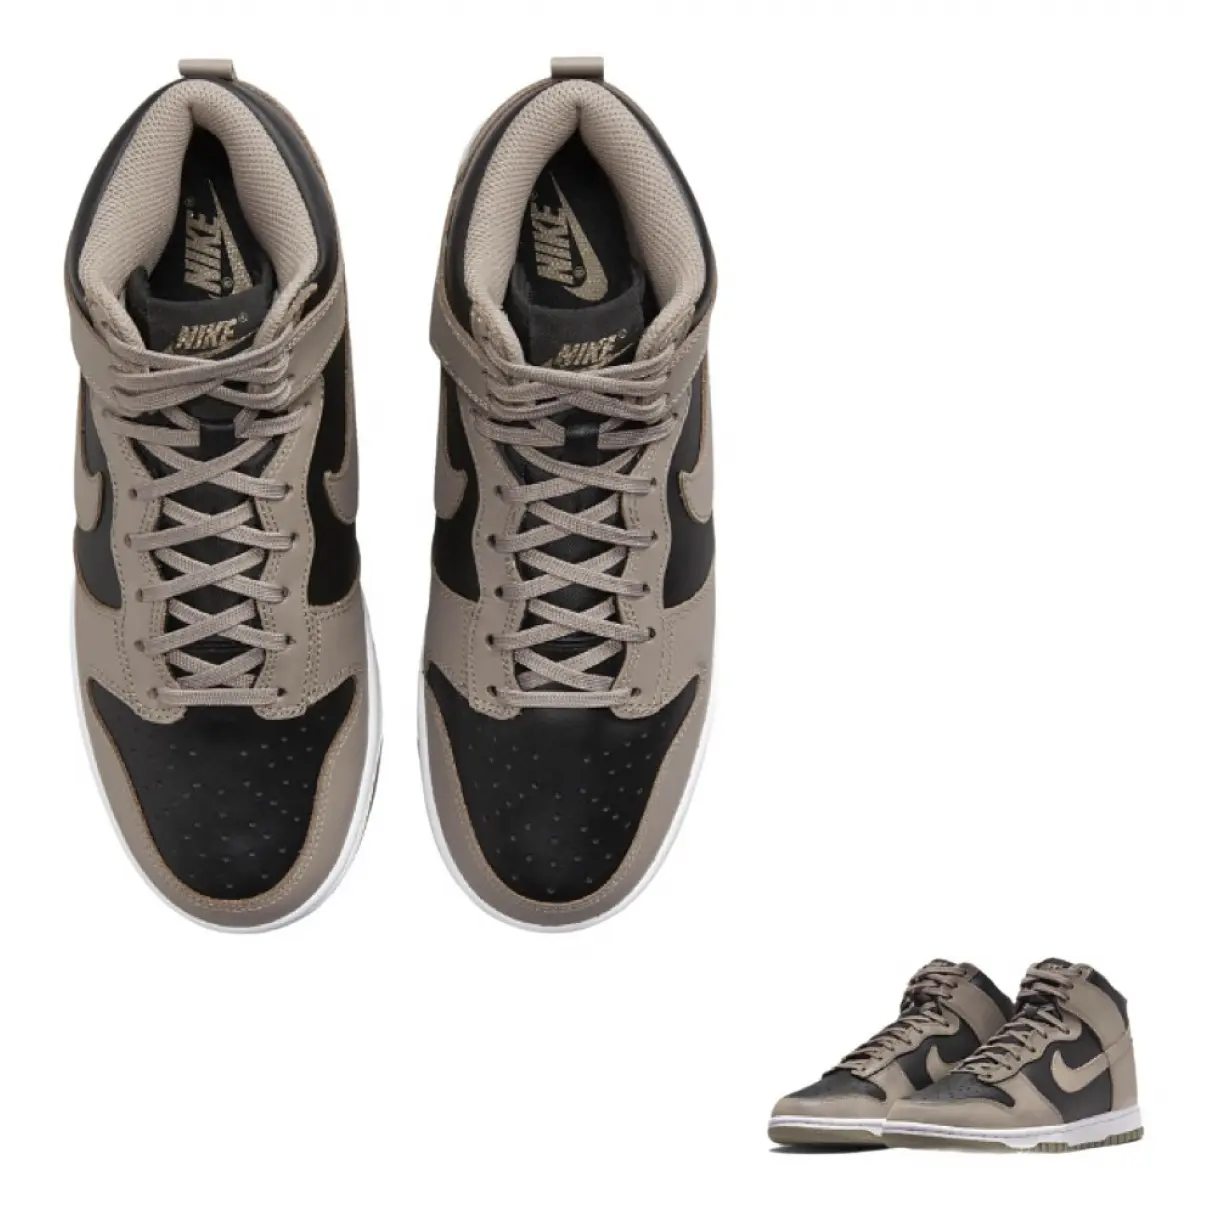 Buy Nike SB Dunk leather trainers online